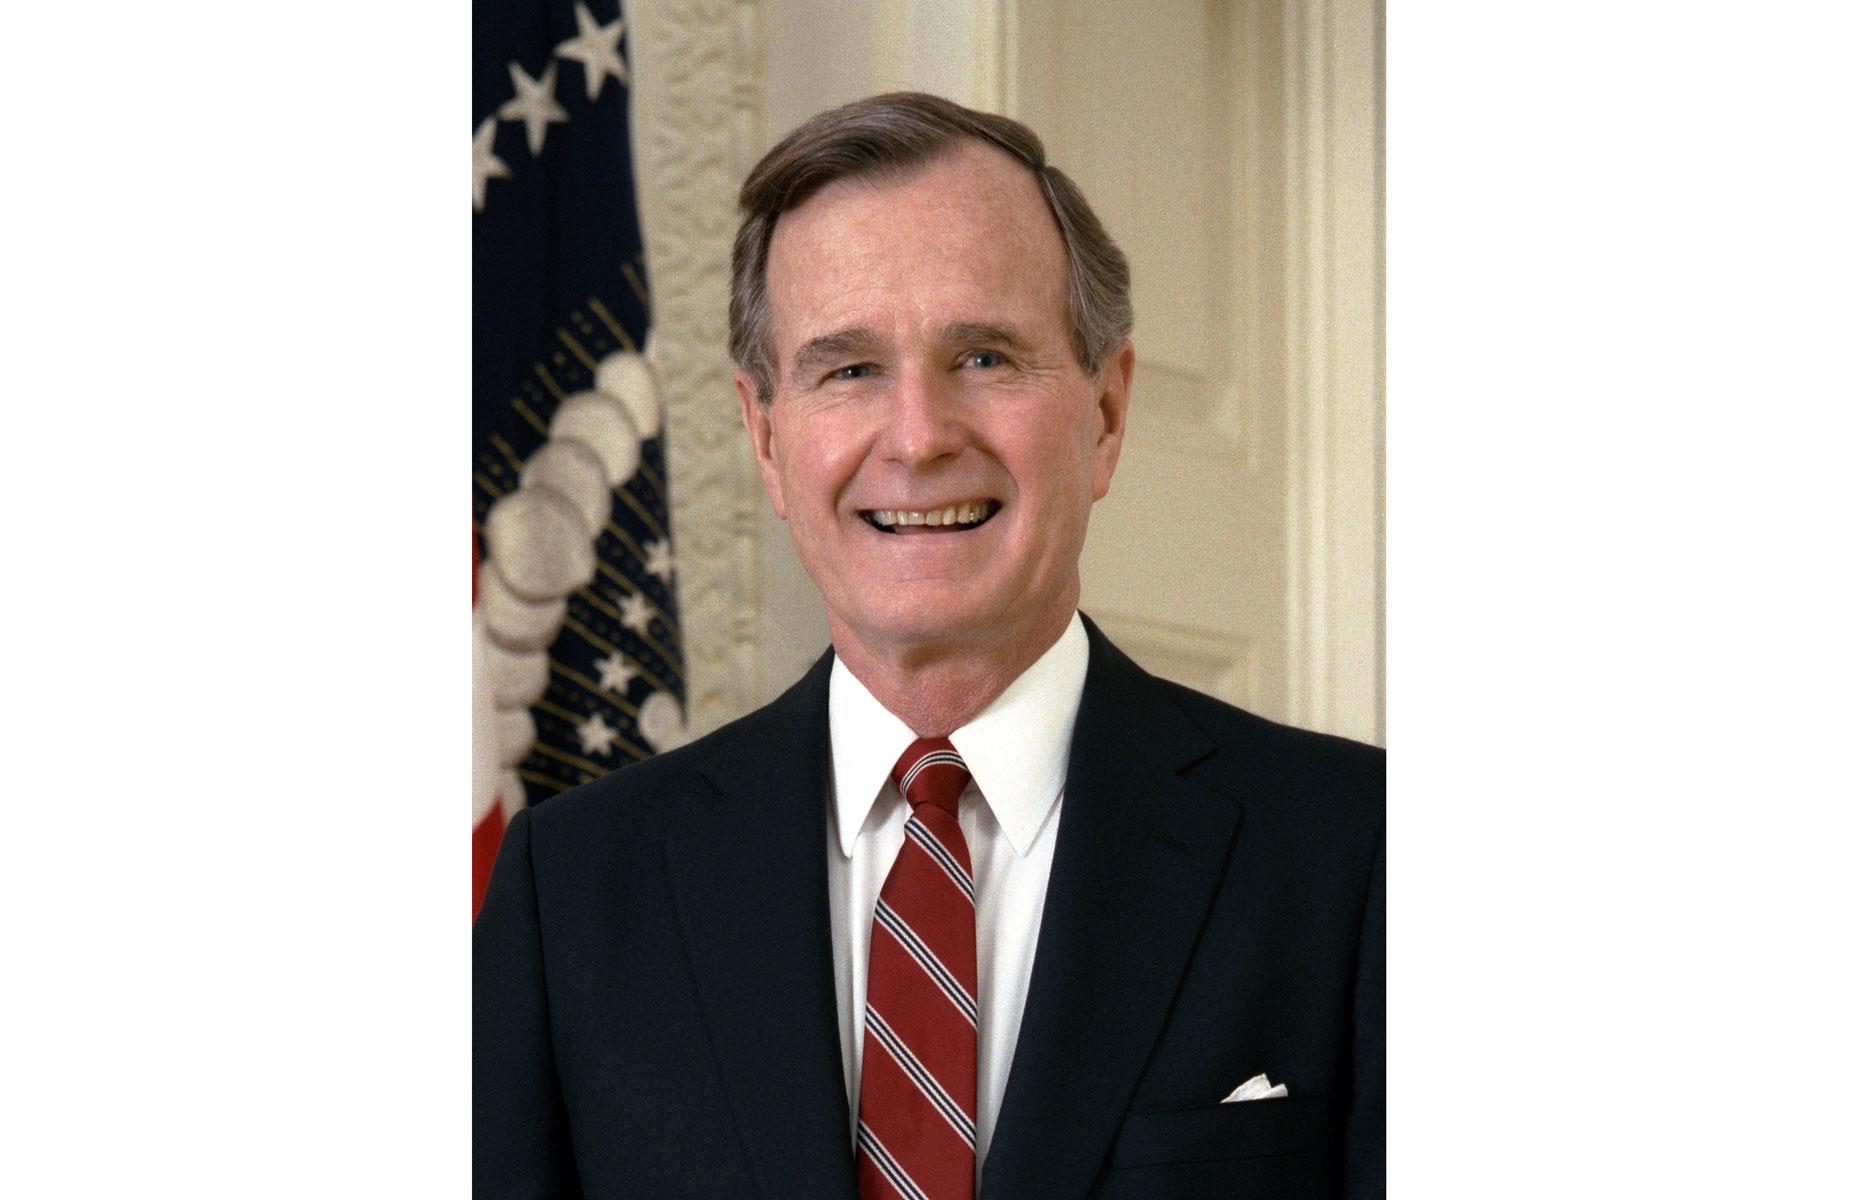 <p>The family was propelled into the big time in terms of both money and politics by Prescott's second son, George Herbert Walker Bush (1924-2018).</p>  <p>Supported by his father's wealth and powerful contacts, the shrewd George racked up a multimillion-dollar fortune in the Texan oil industry before embarking on his political career in the early 1960s.</p>